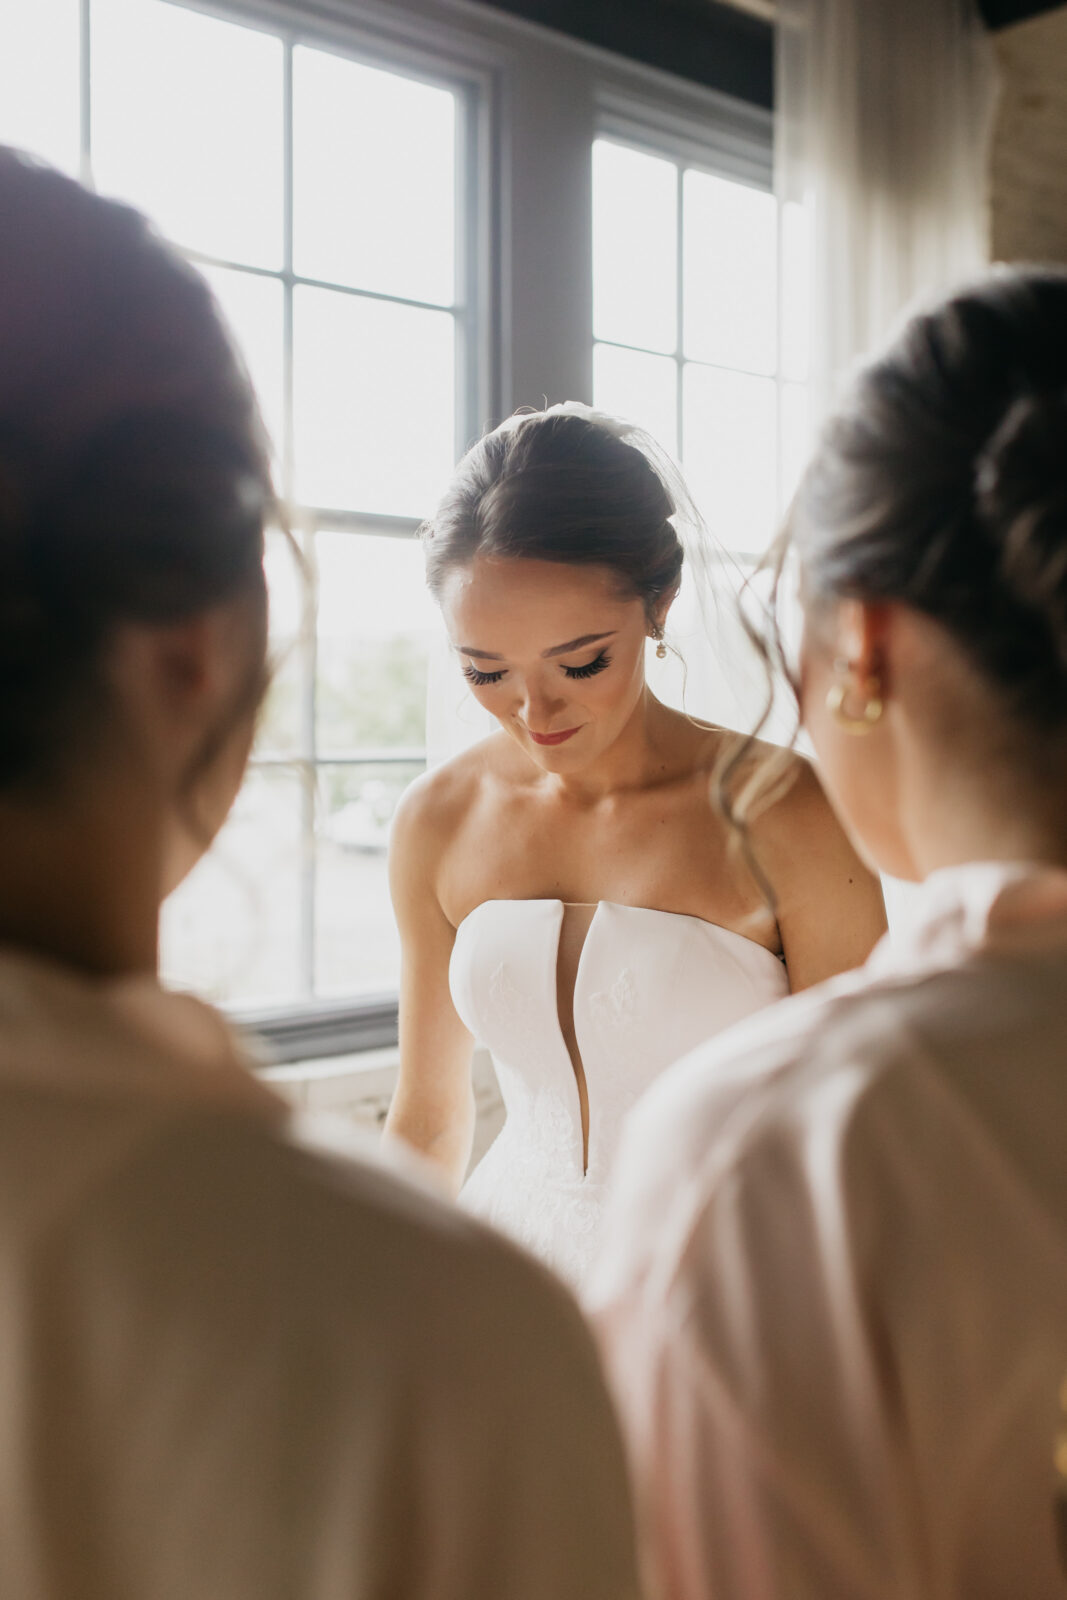 A photo of the bride getting ready for her wedding day